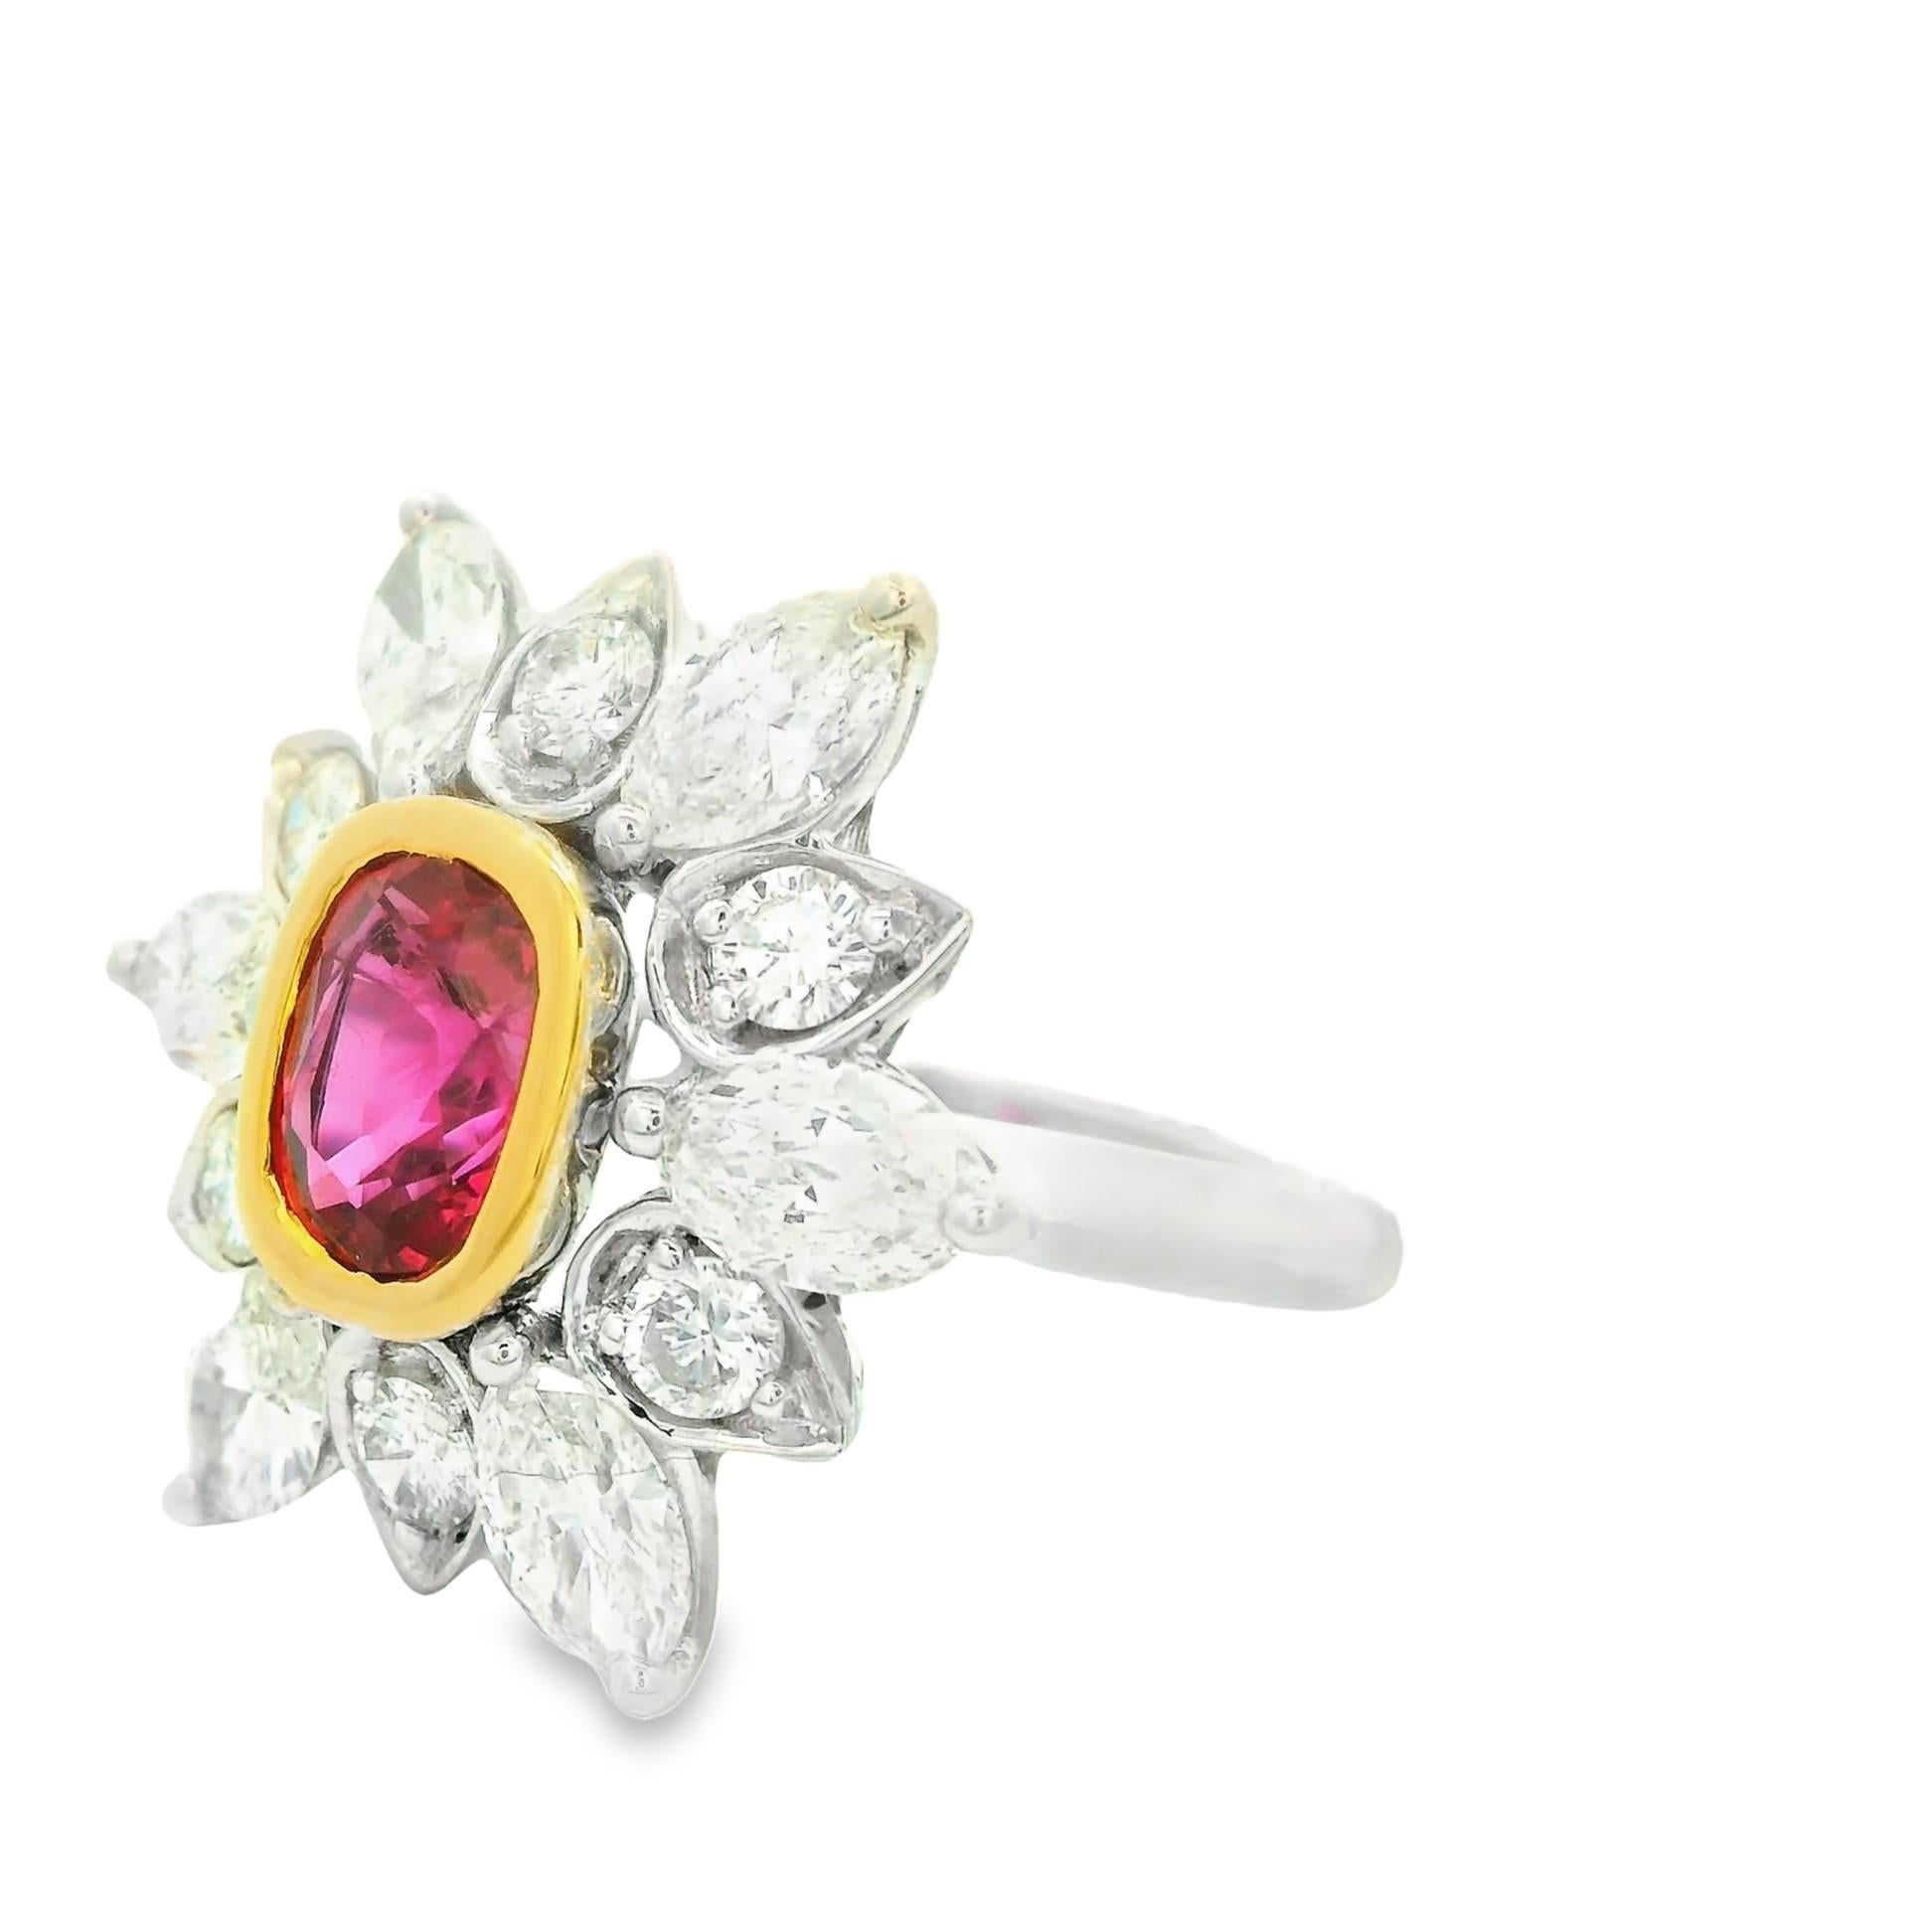 A fine and elegant ruby is set in the middle of this diamond sunburst designed ring! The ruby has a rich pure red color that glows in the light. It is certified by the AGL lab in New York as natural with a Thai origin. It is surrounded by 2.25